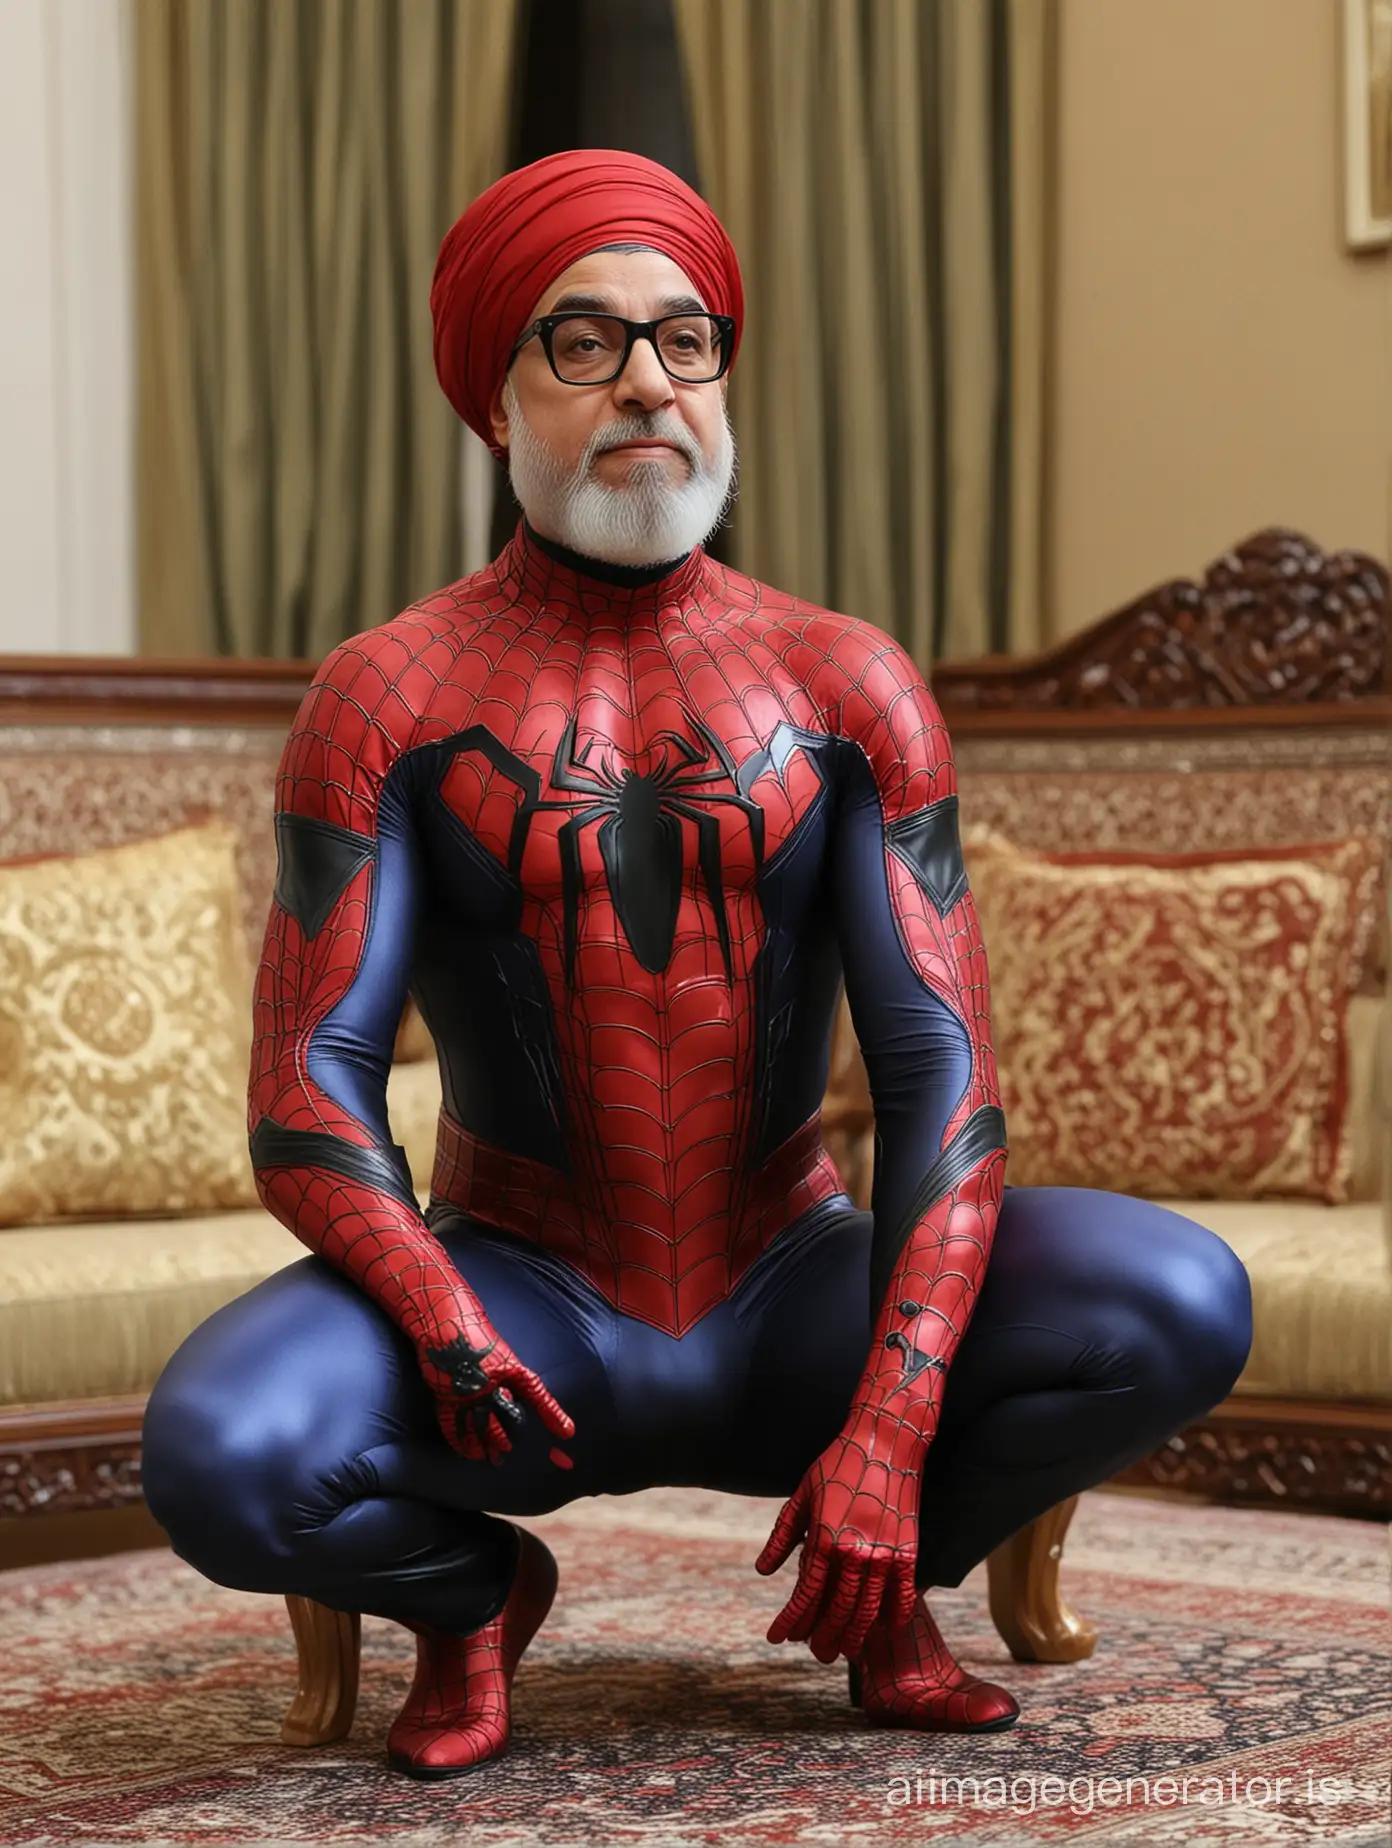 Hassan Rouhani wearing Spiderman suit